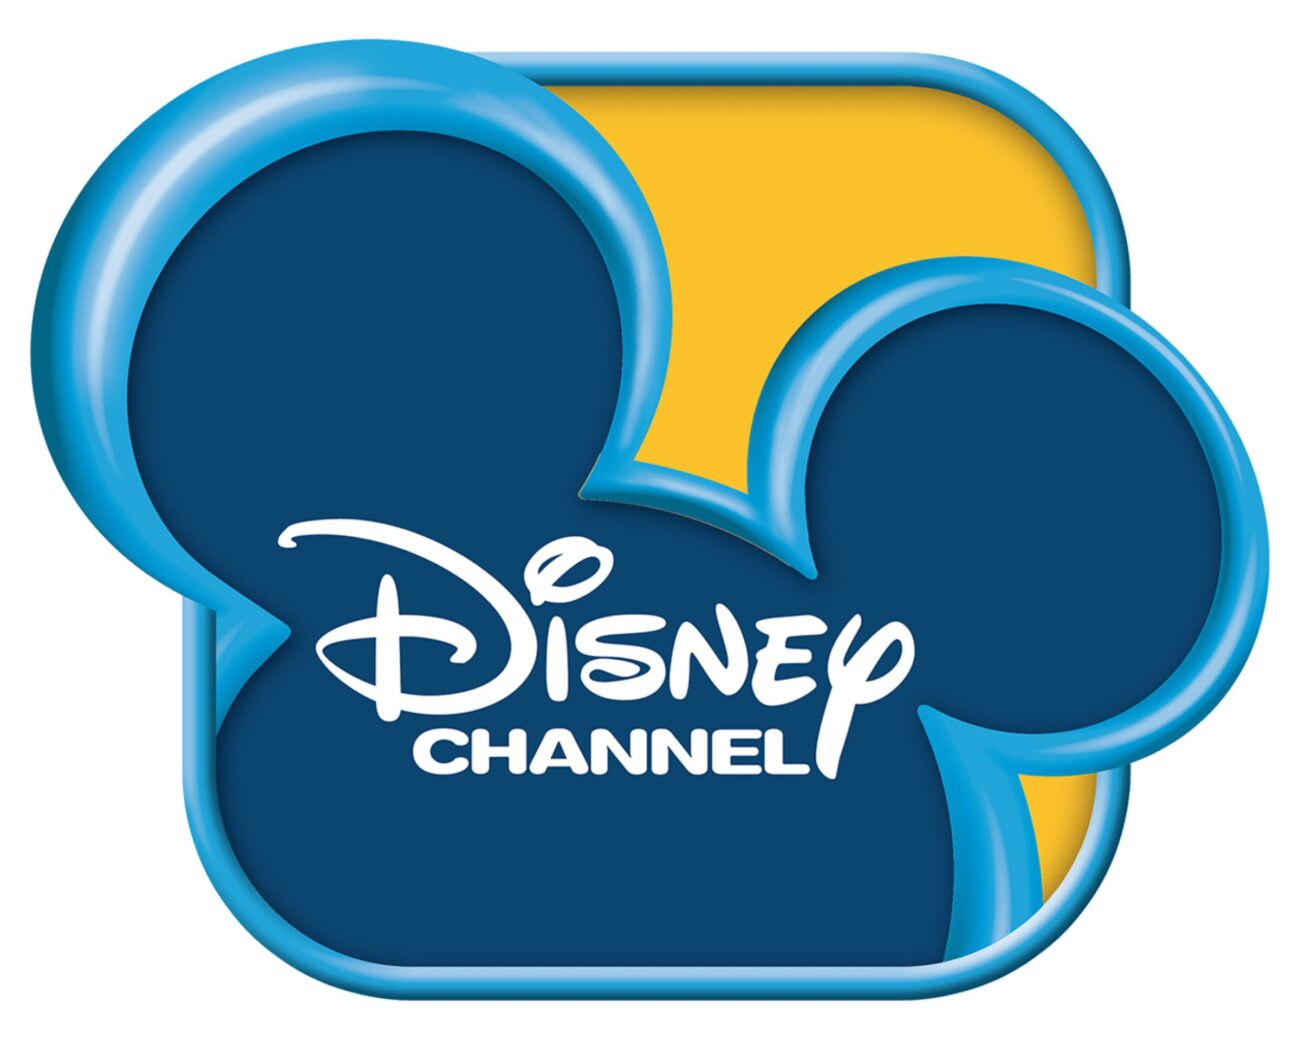 Ready for some good ol' nostalgia to help you forget all about today's reality? Travel back in time and relive all the classic Disney channel shows here.